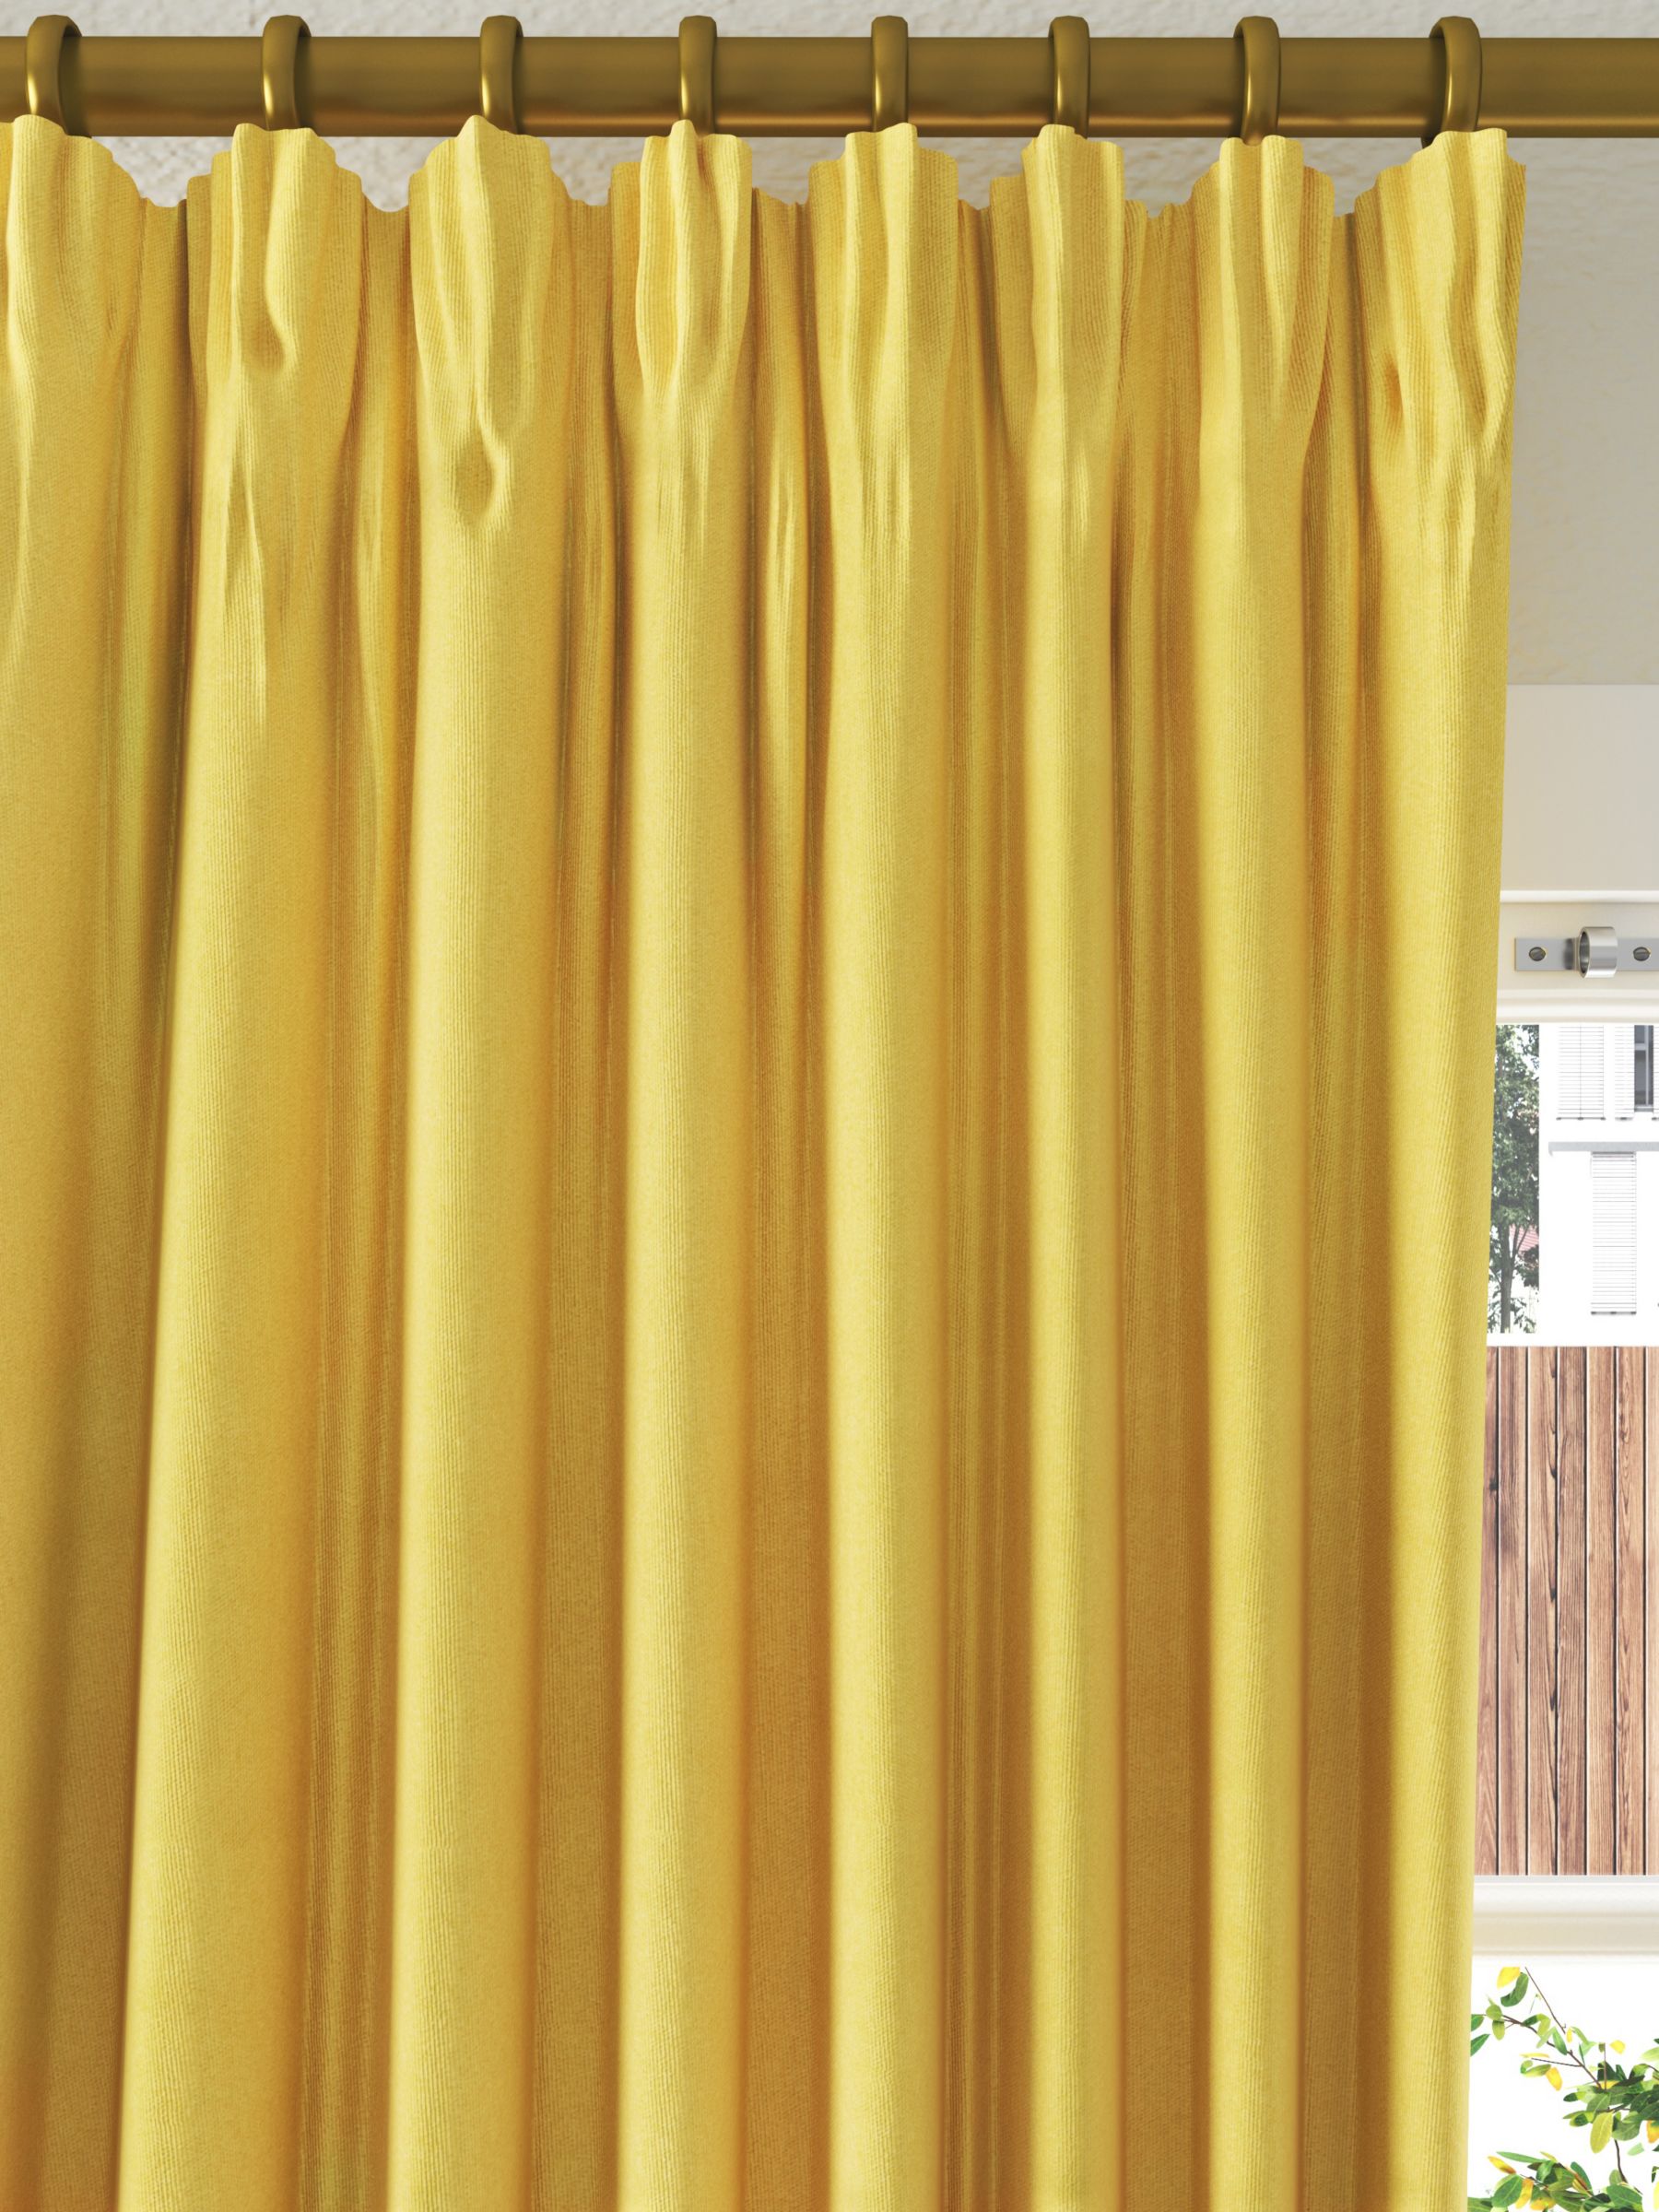 Pencil Pleat Curtains John Lewis, Navy And Yellow Curtains Uk